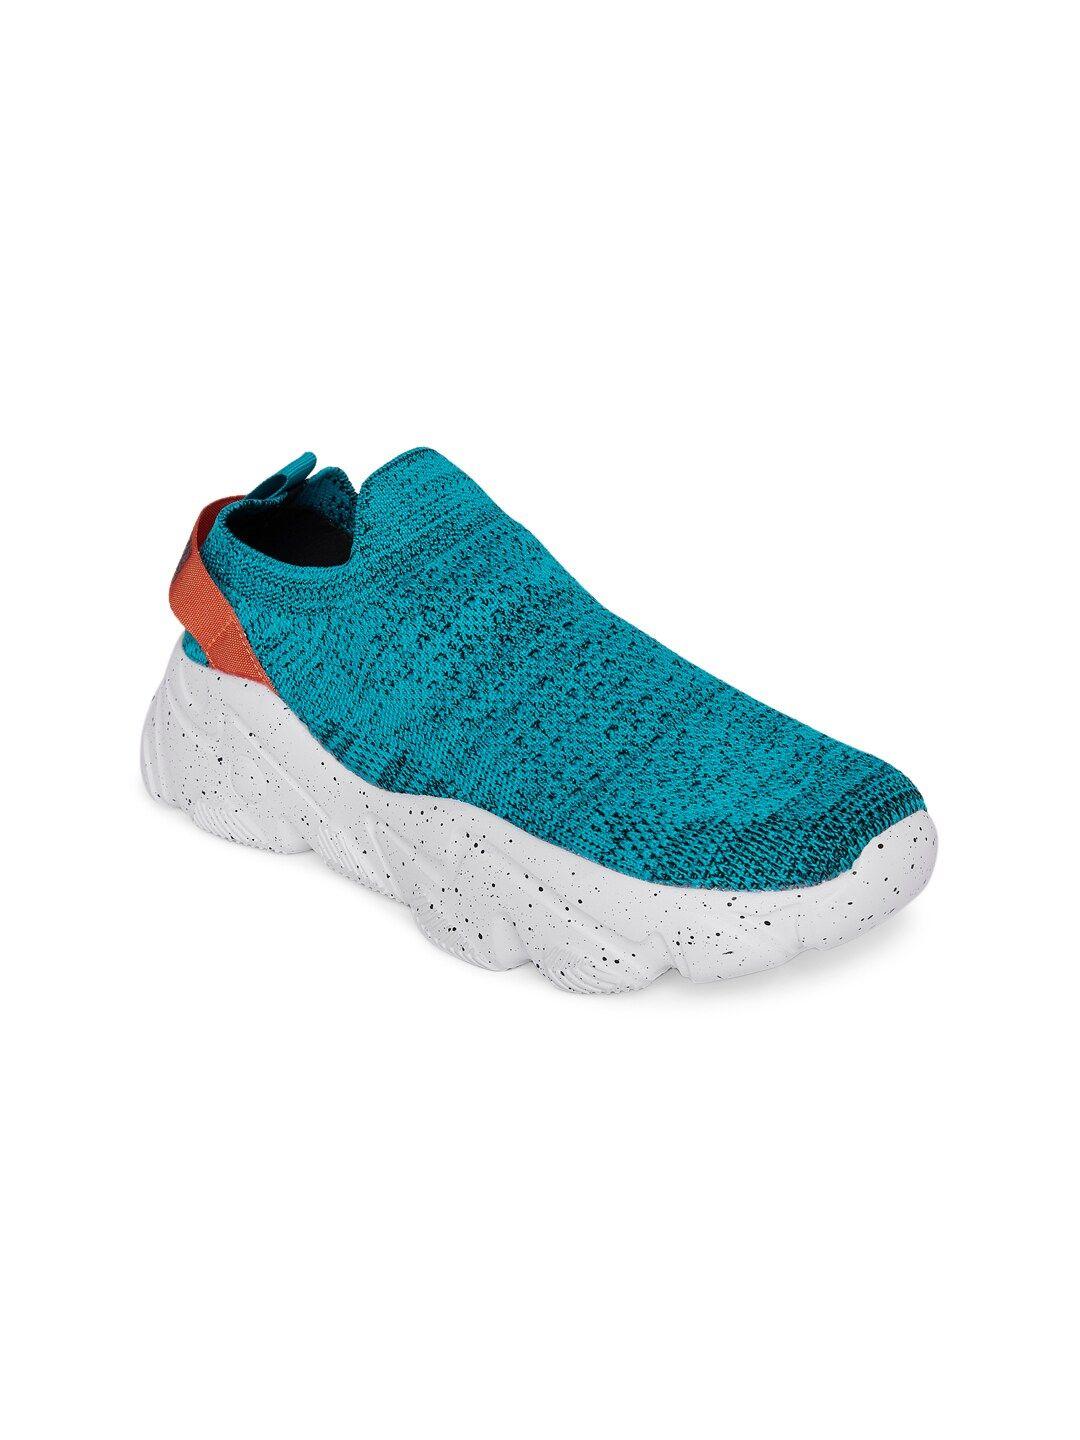 forever glam by pantaloons women blue flyknit walking non-marking shoes